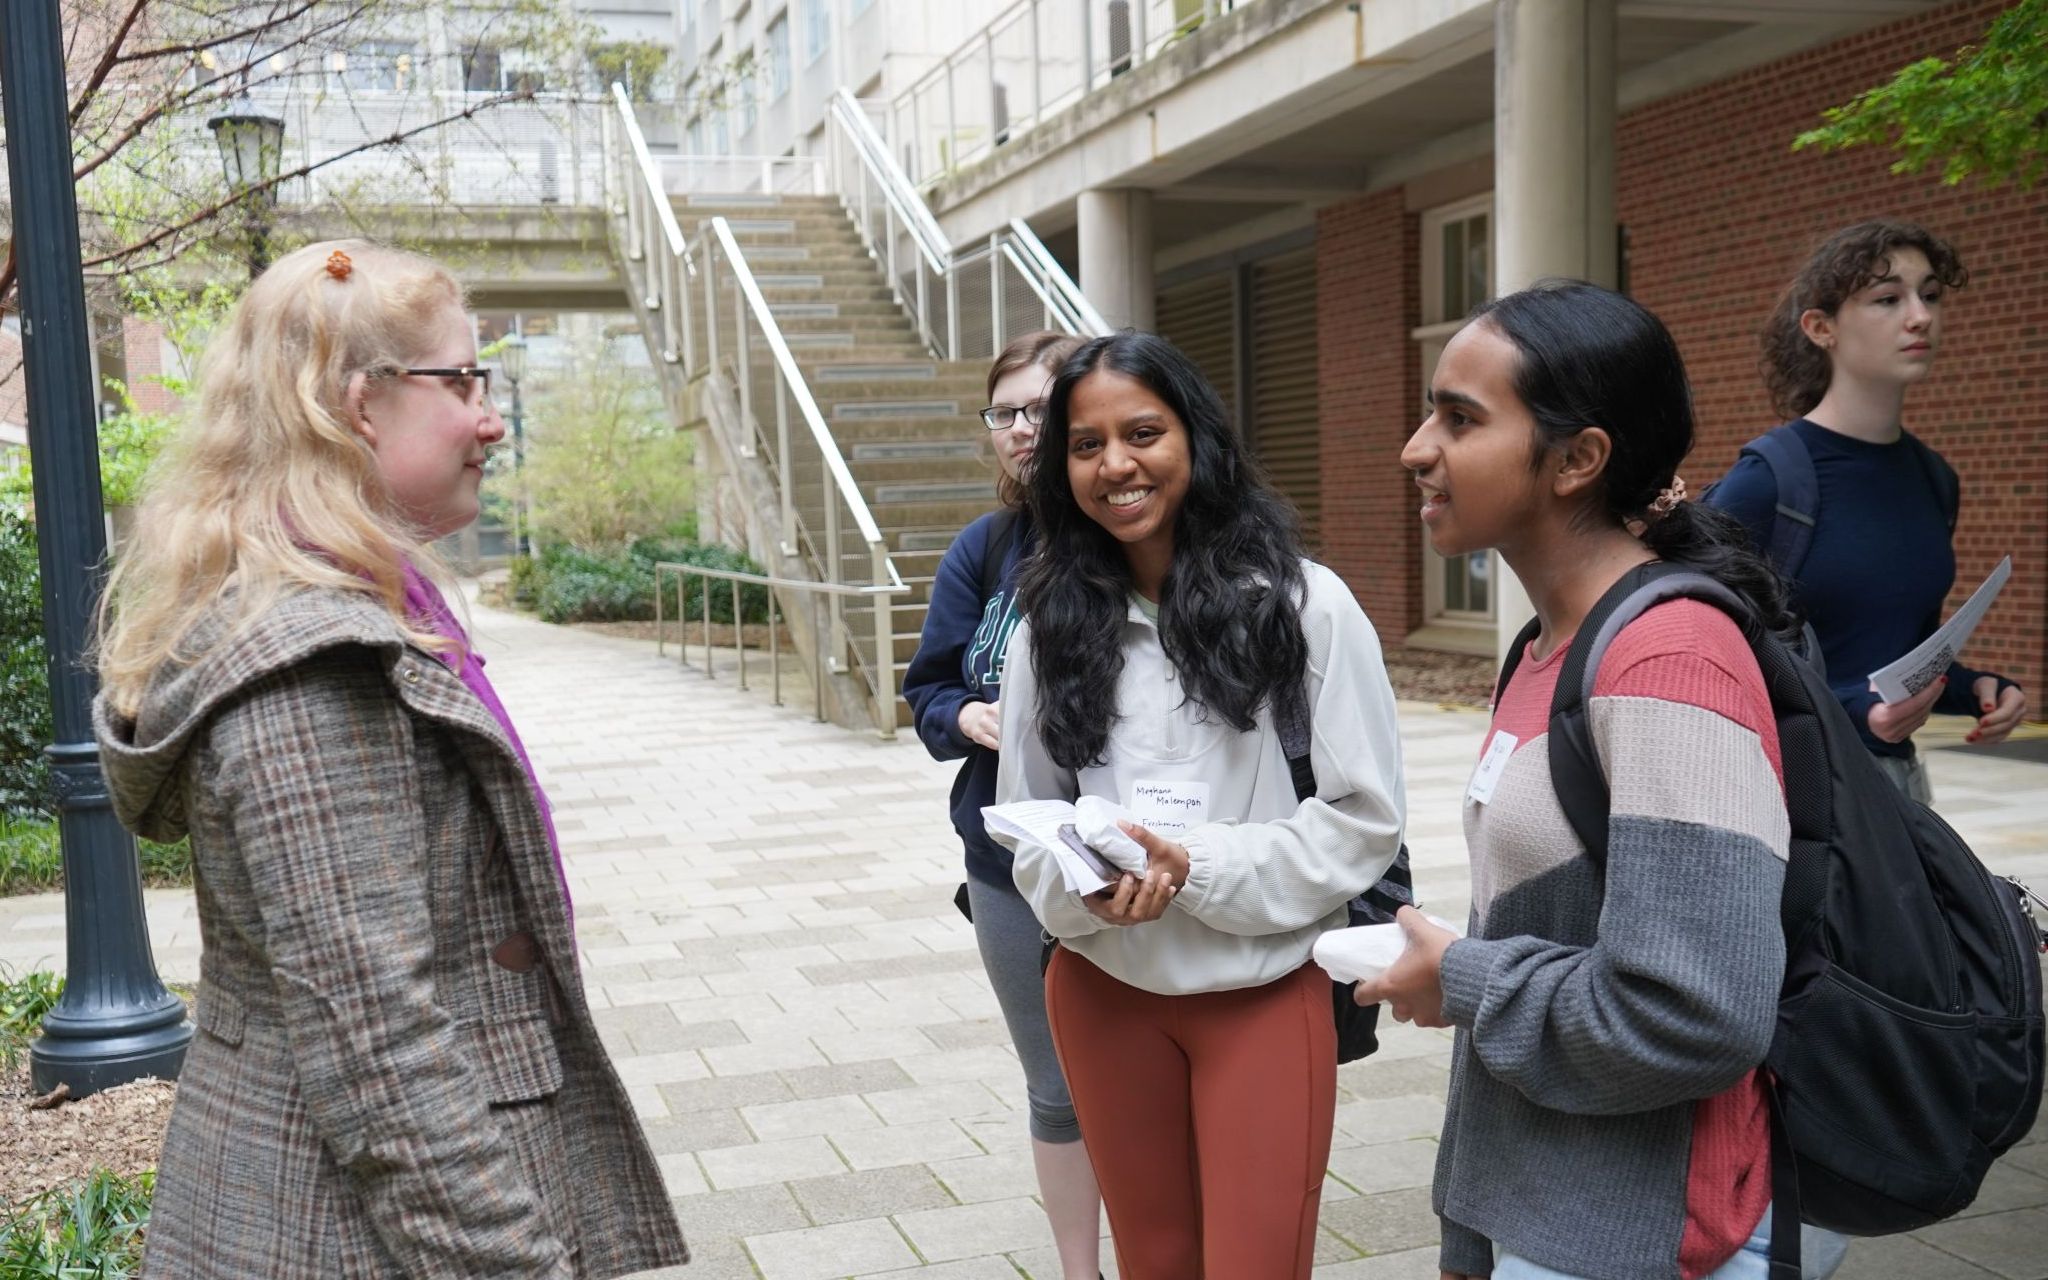 Professor Curtis talks with three students.  The student in the middle has noticed the camera and she is smiling at the photographer.